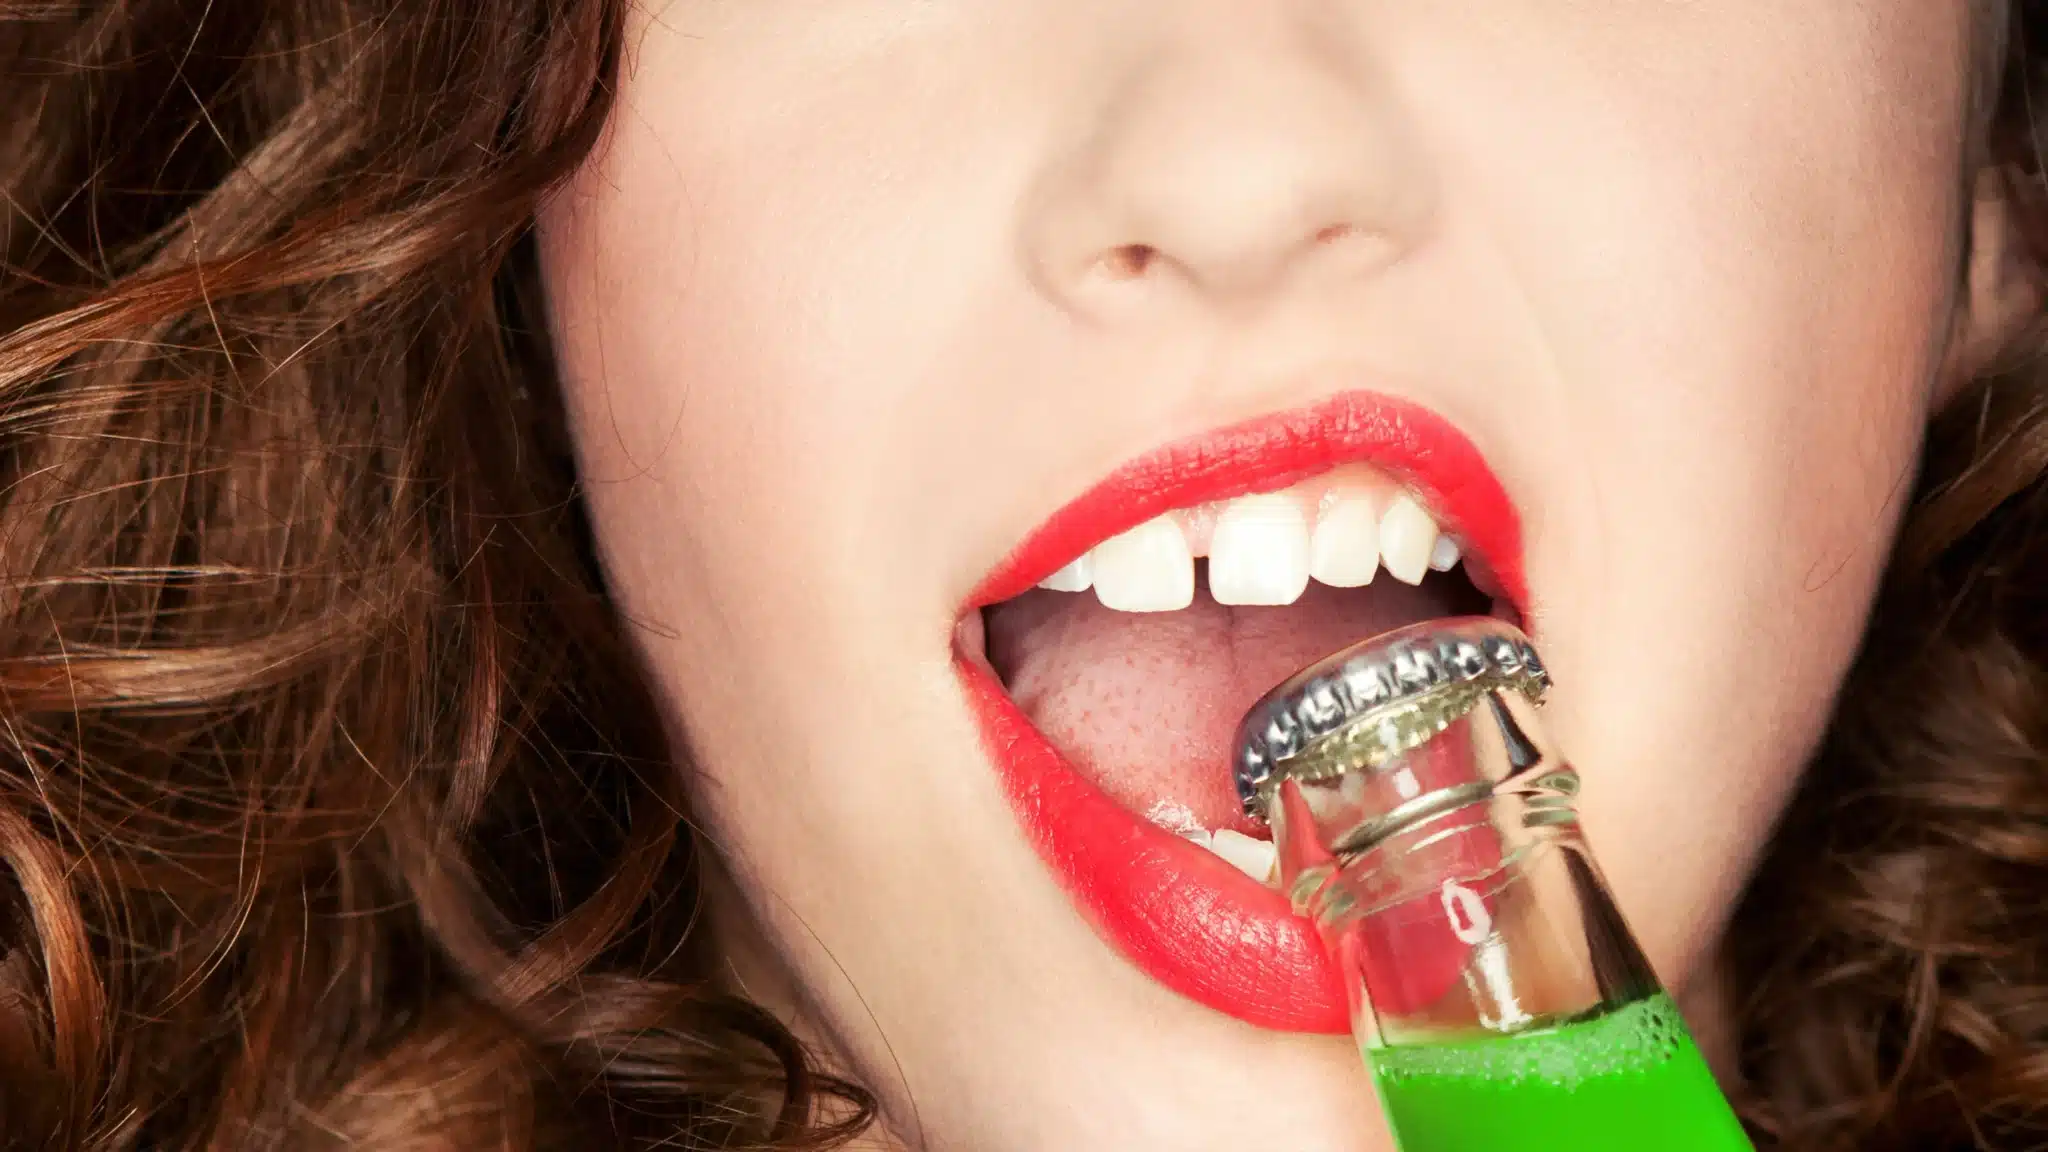 woman using her teeth as a substitute bottle opener